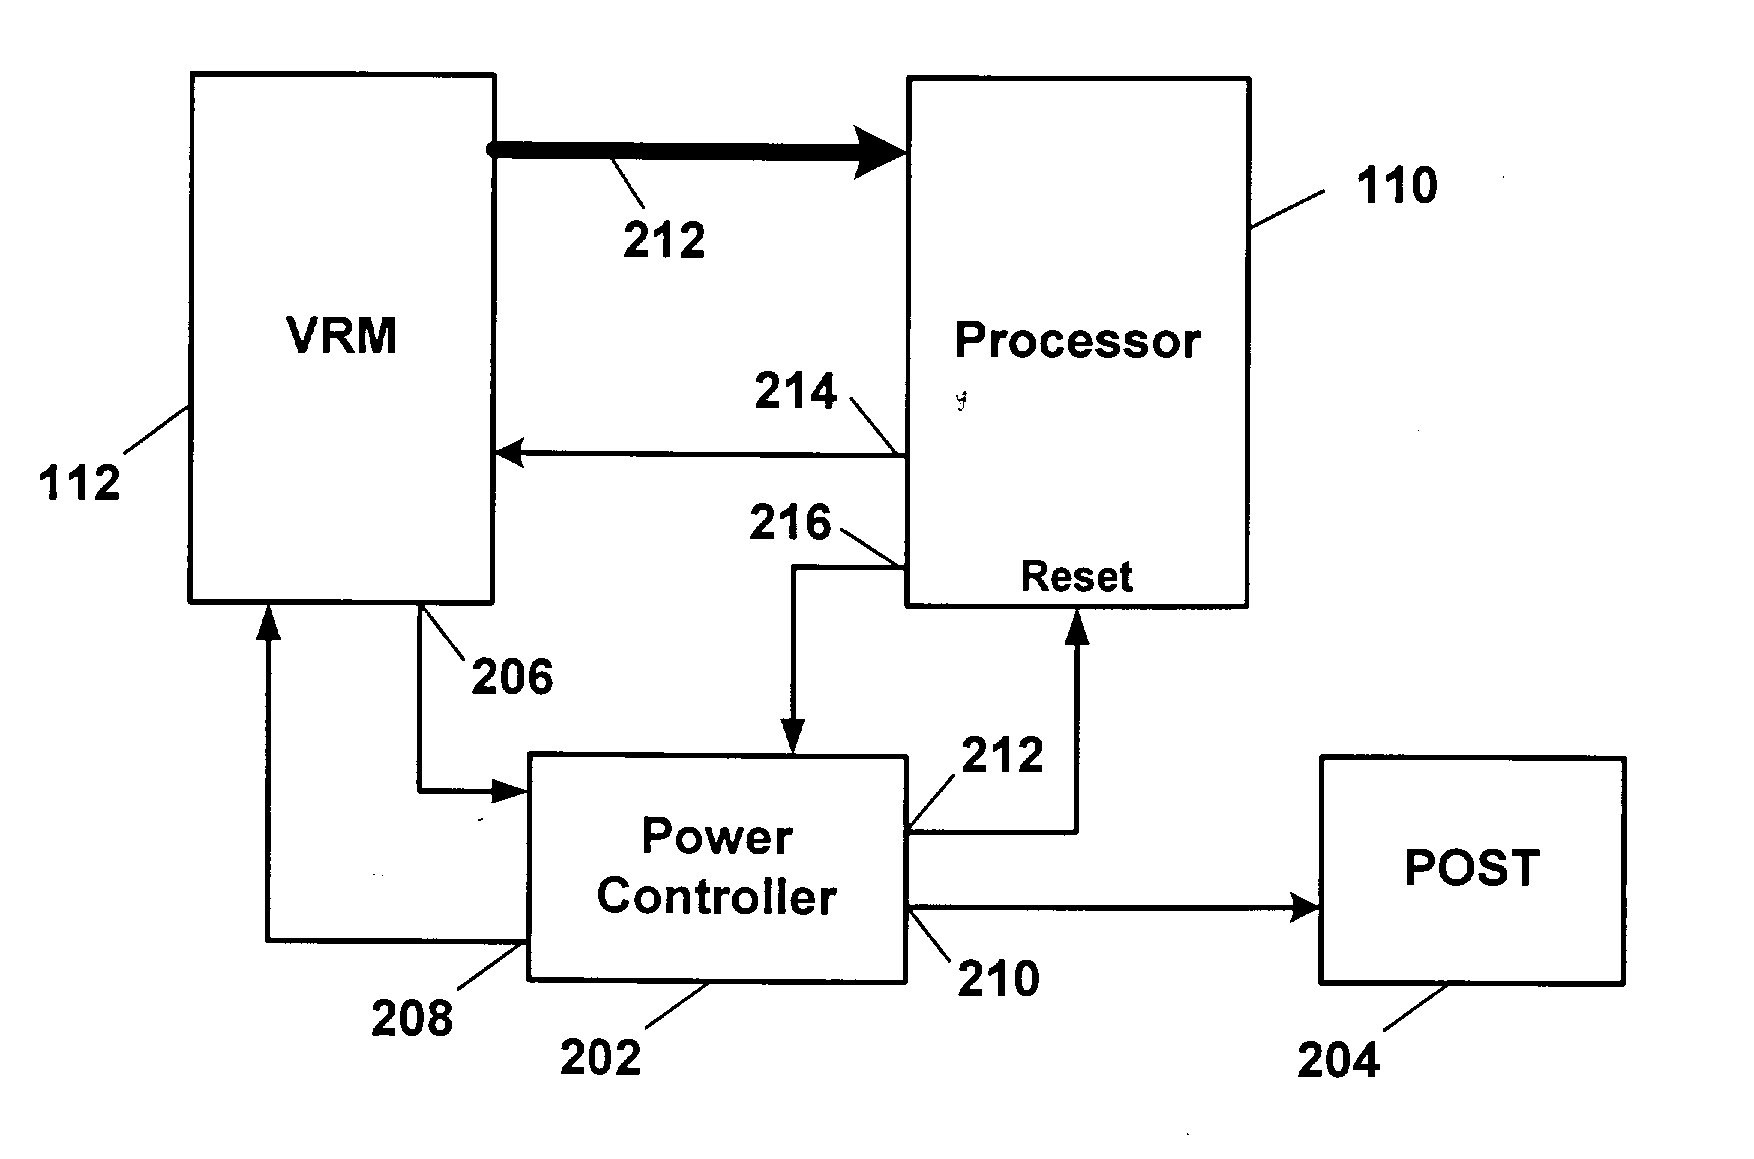 Power-up of multiple processors when a voltage regulator module has failed